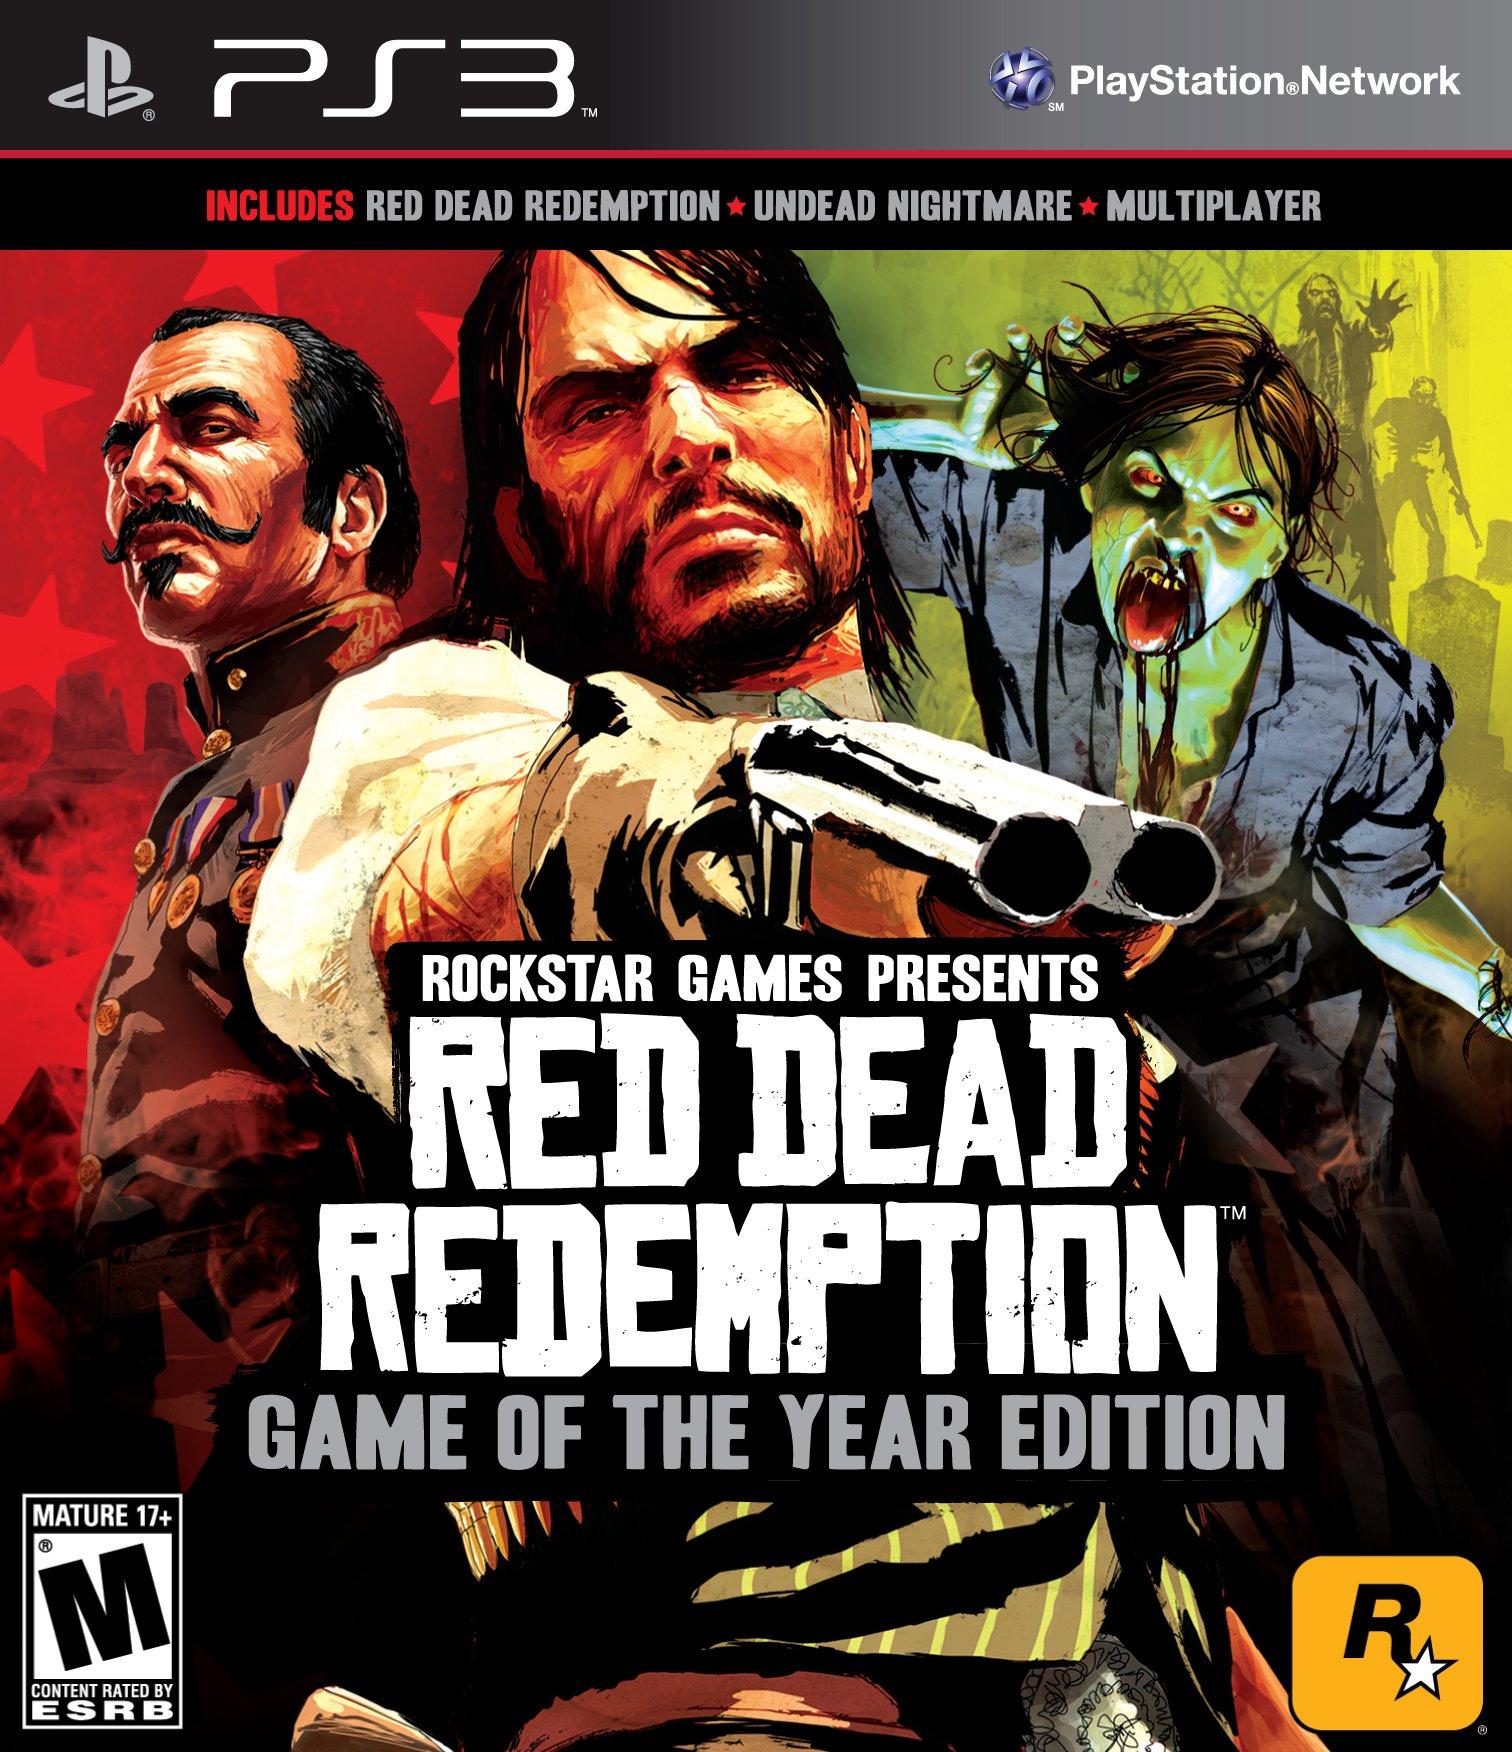 Red Dead Redemption Game of the Year Edition - PlayStation 3